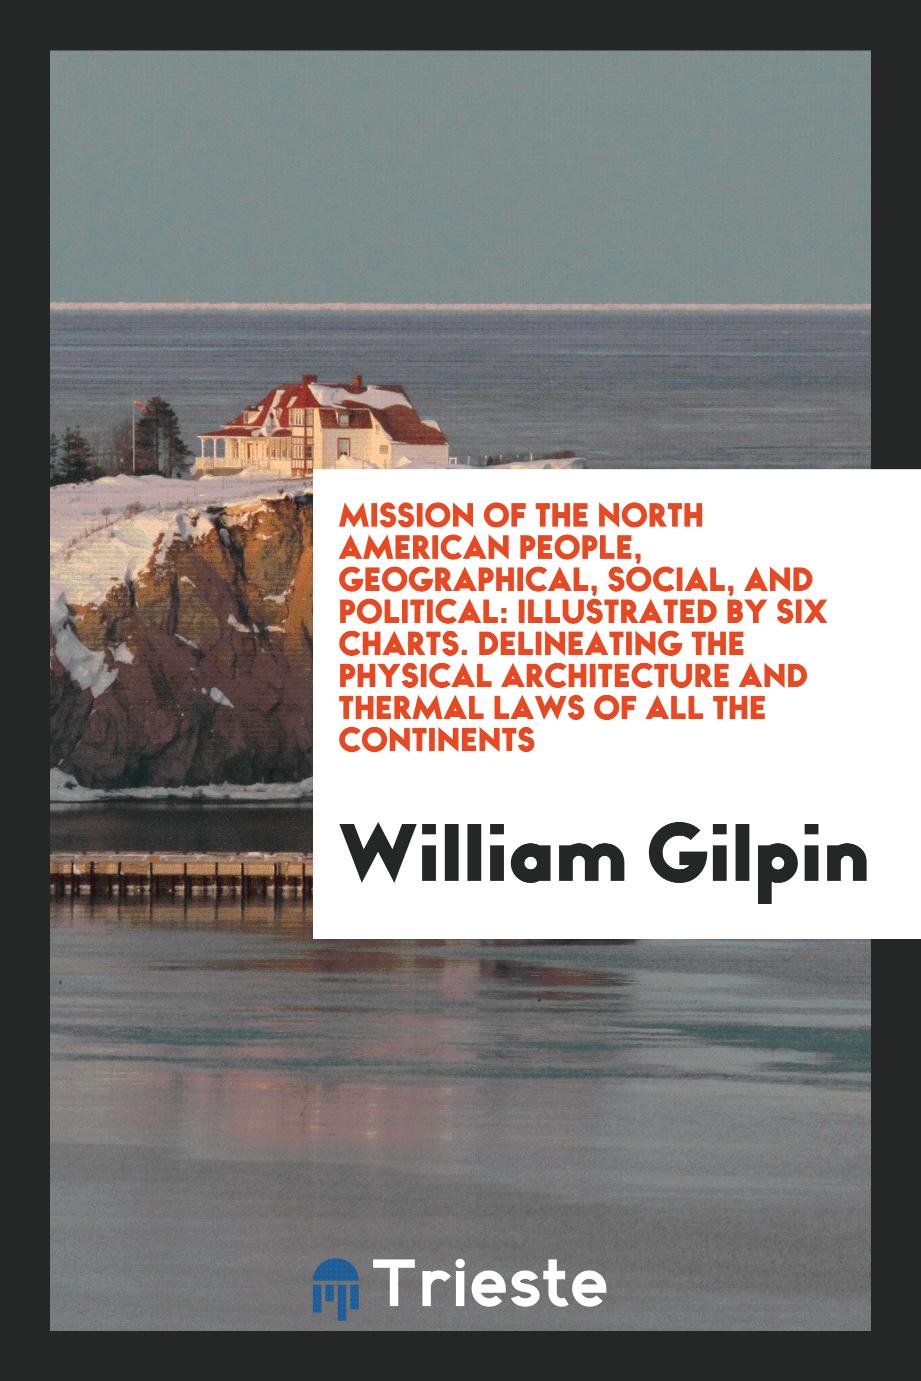 Mission of the North American People, Geographical, Social, and Political: Illustrated by Six Charts. Delineating the Physical Architecture and Thermal Laws of All the Continents